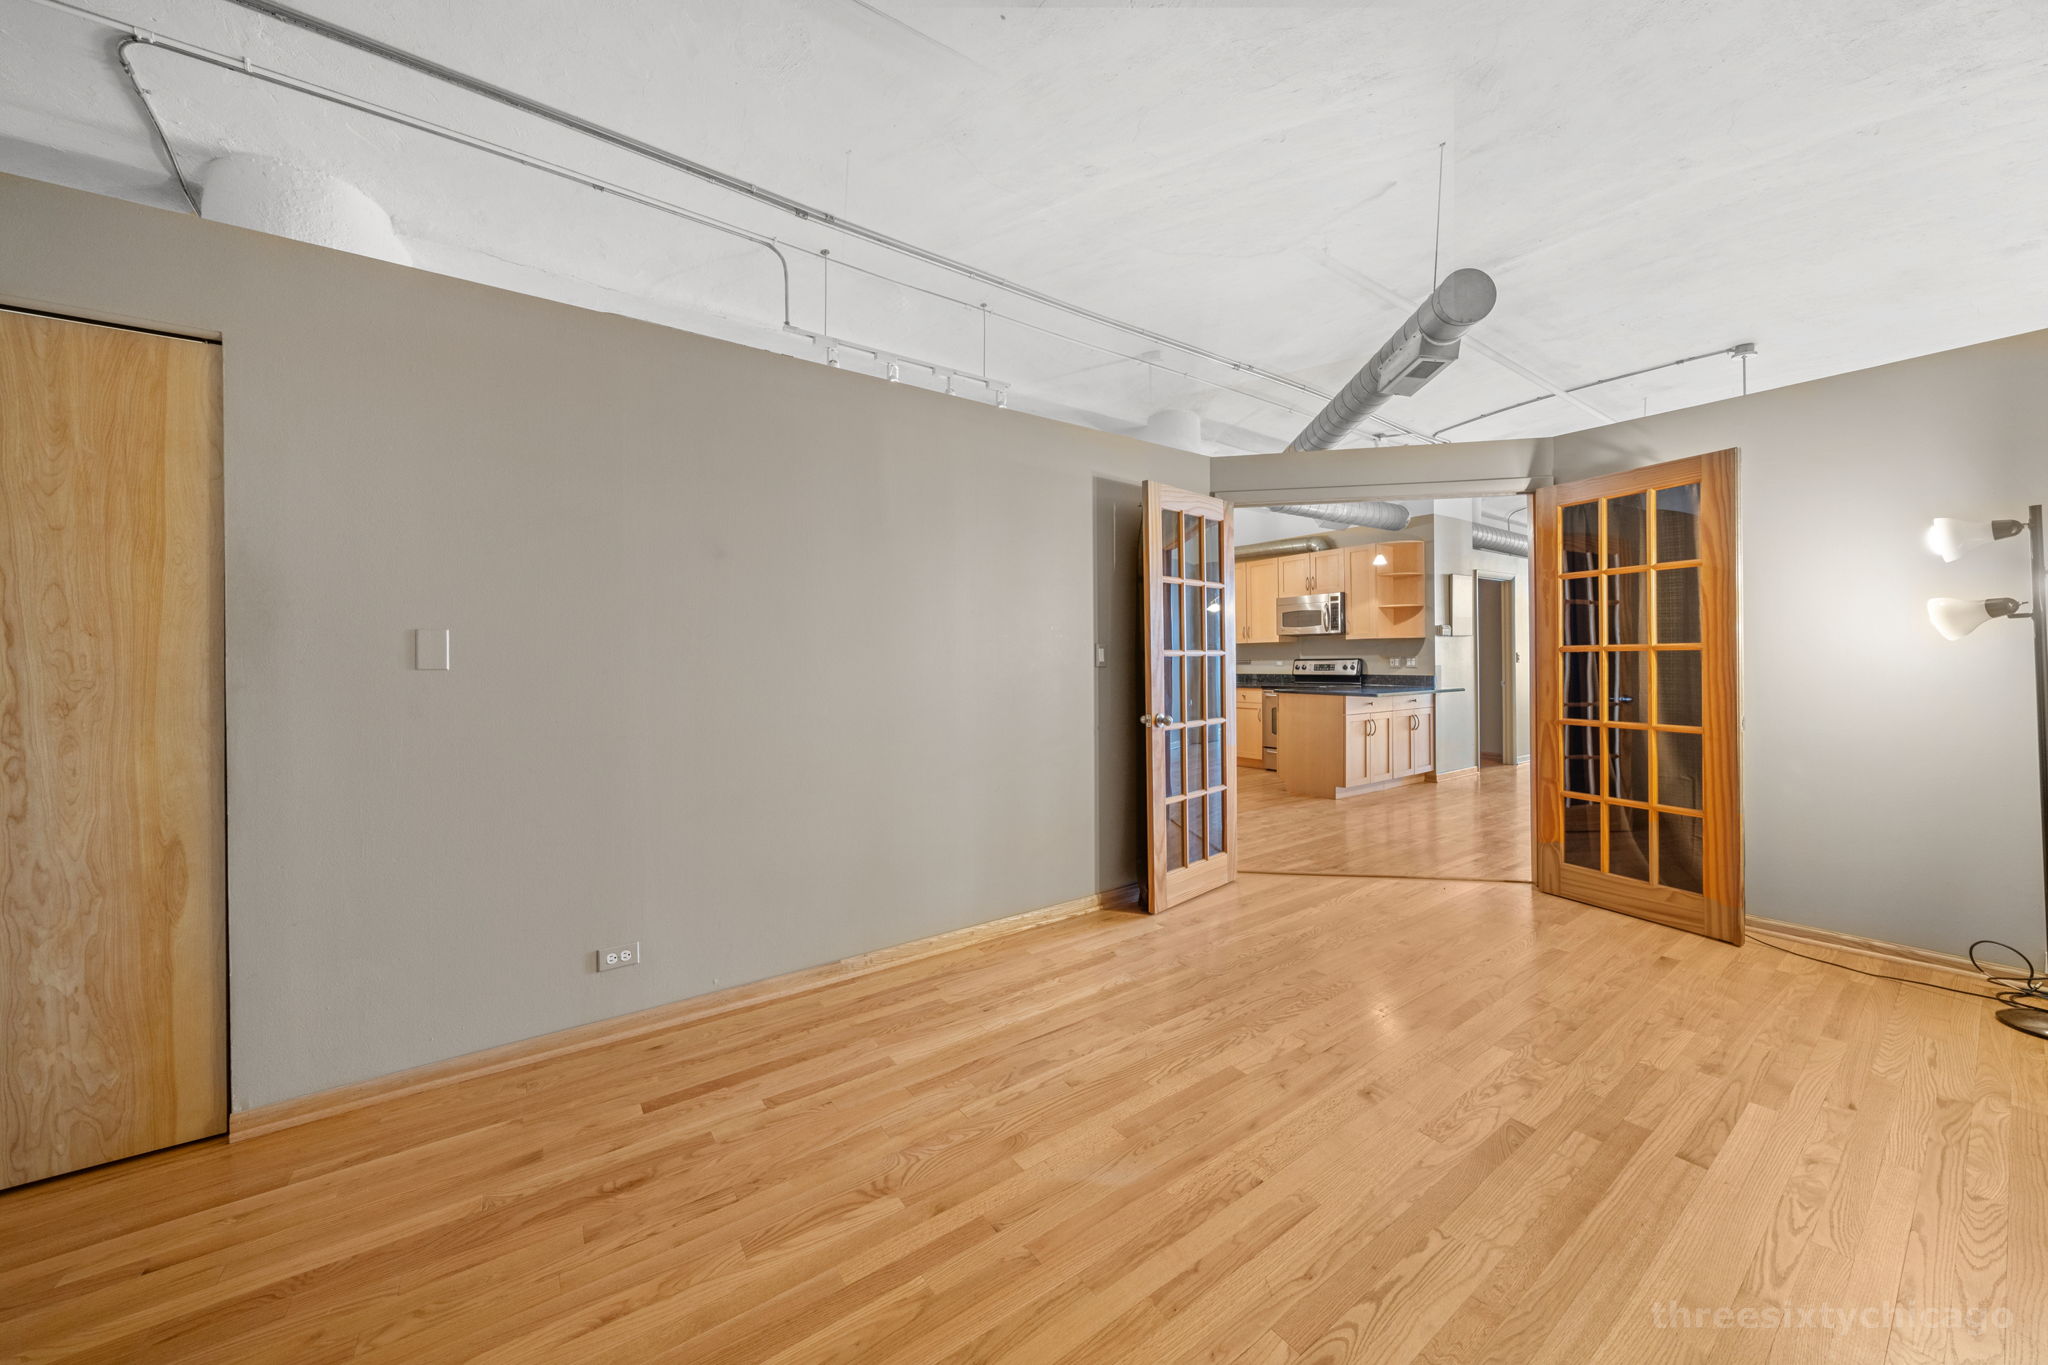  801 S Wells St 807, Chicago, IL 60607, US Photo 14